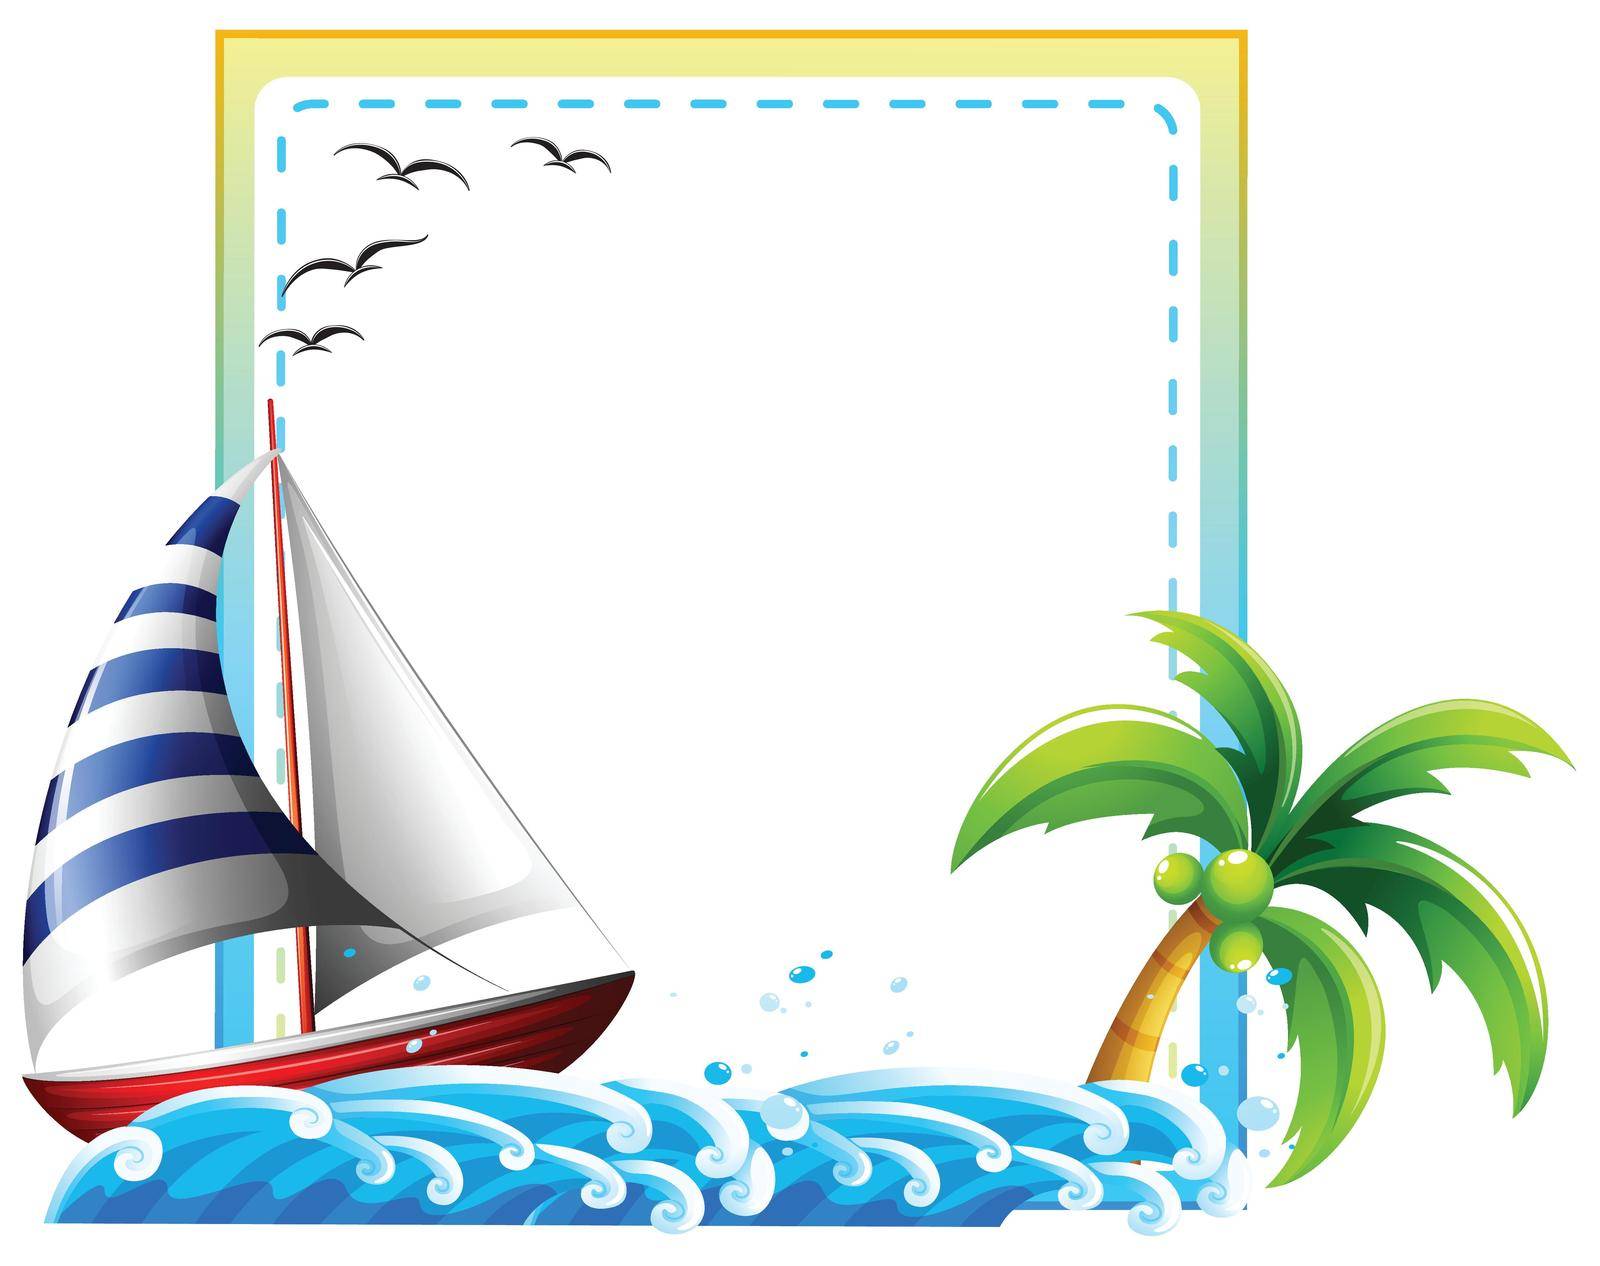 Square frame with sailing boat and sea design